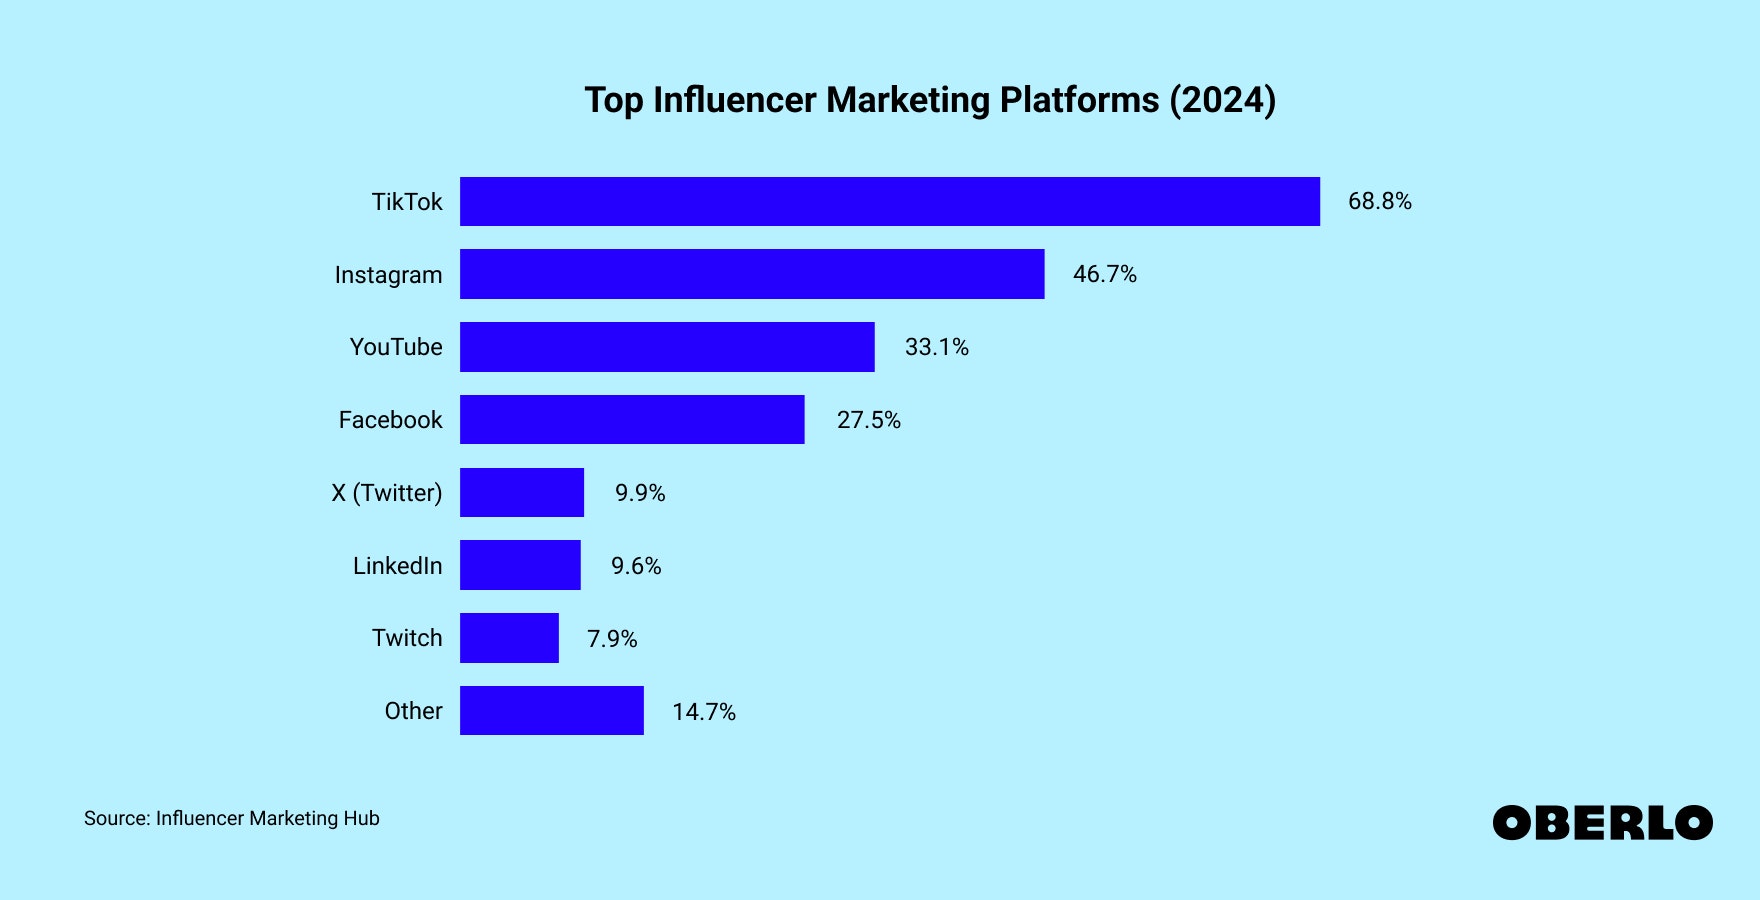 Chart showing: Top Influencer Marketing Platforms in 2024